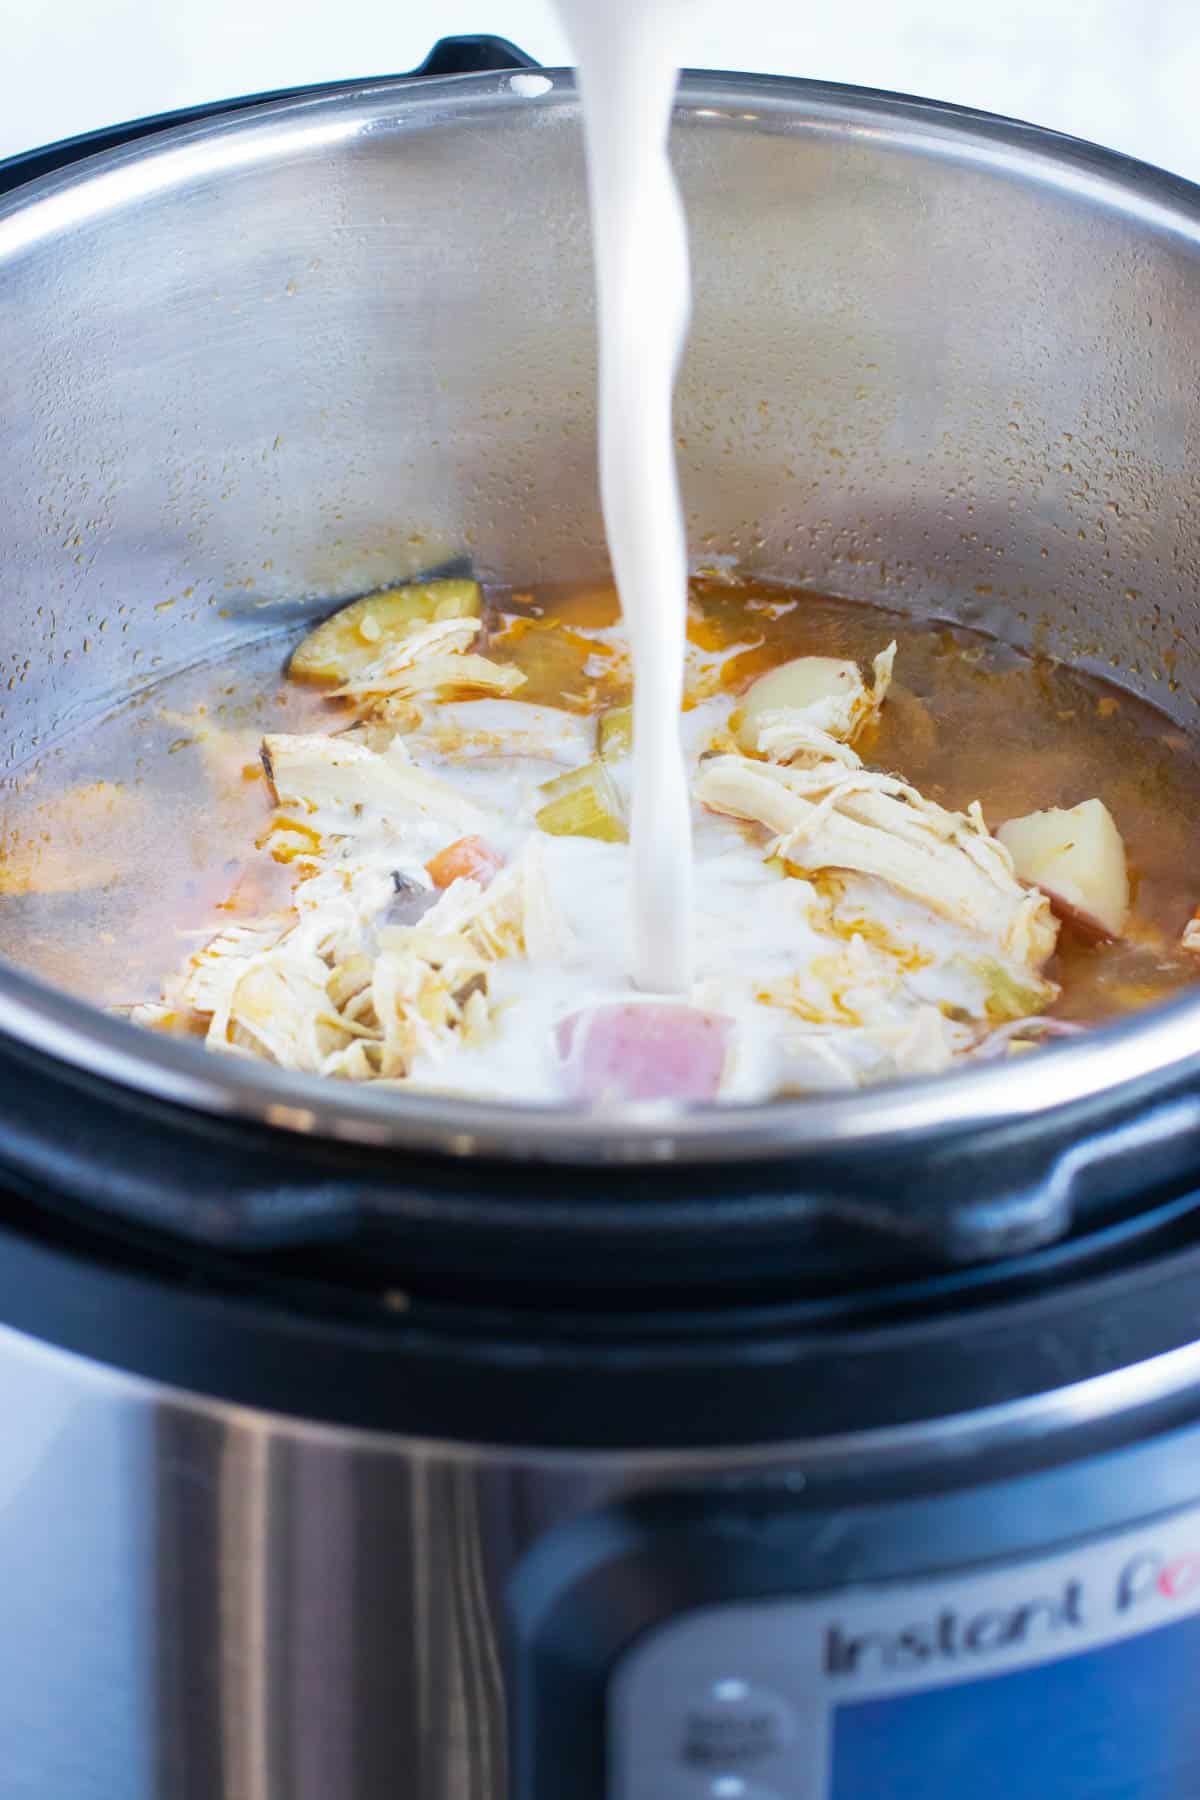 A starch slurry of almond milk and tapioca starch being poured into an Instant Pot to thicken up a chicken vegetable soup recipe.